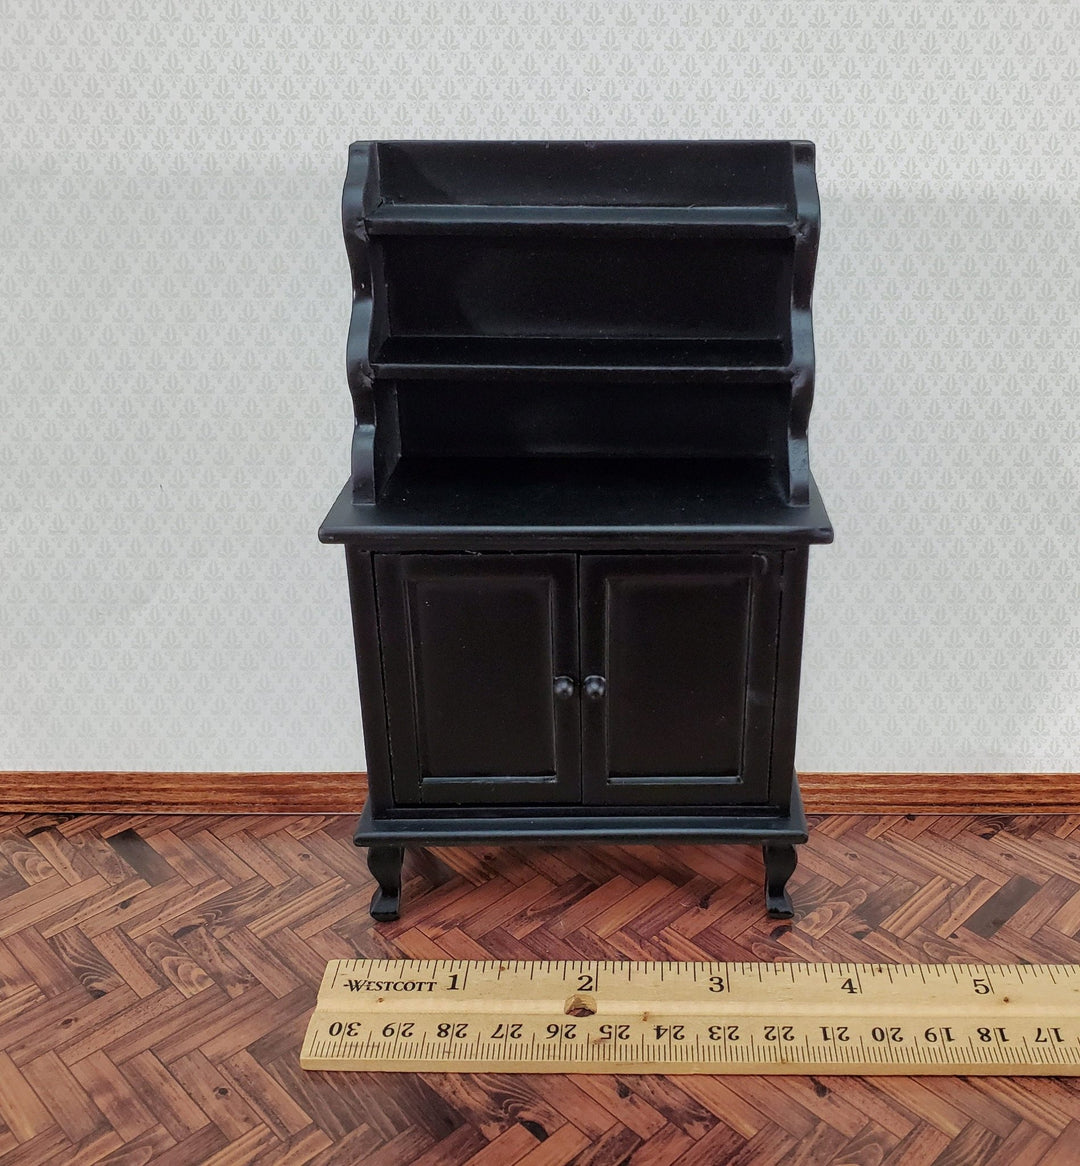 Dollhouse Tall Hutch Cabinet with Shelves Wood with a Black Finish 1:12 Scale Miniature Furniture - Miniature Crush